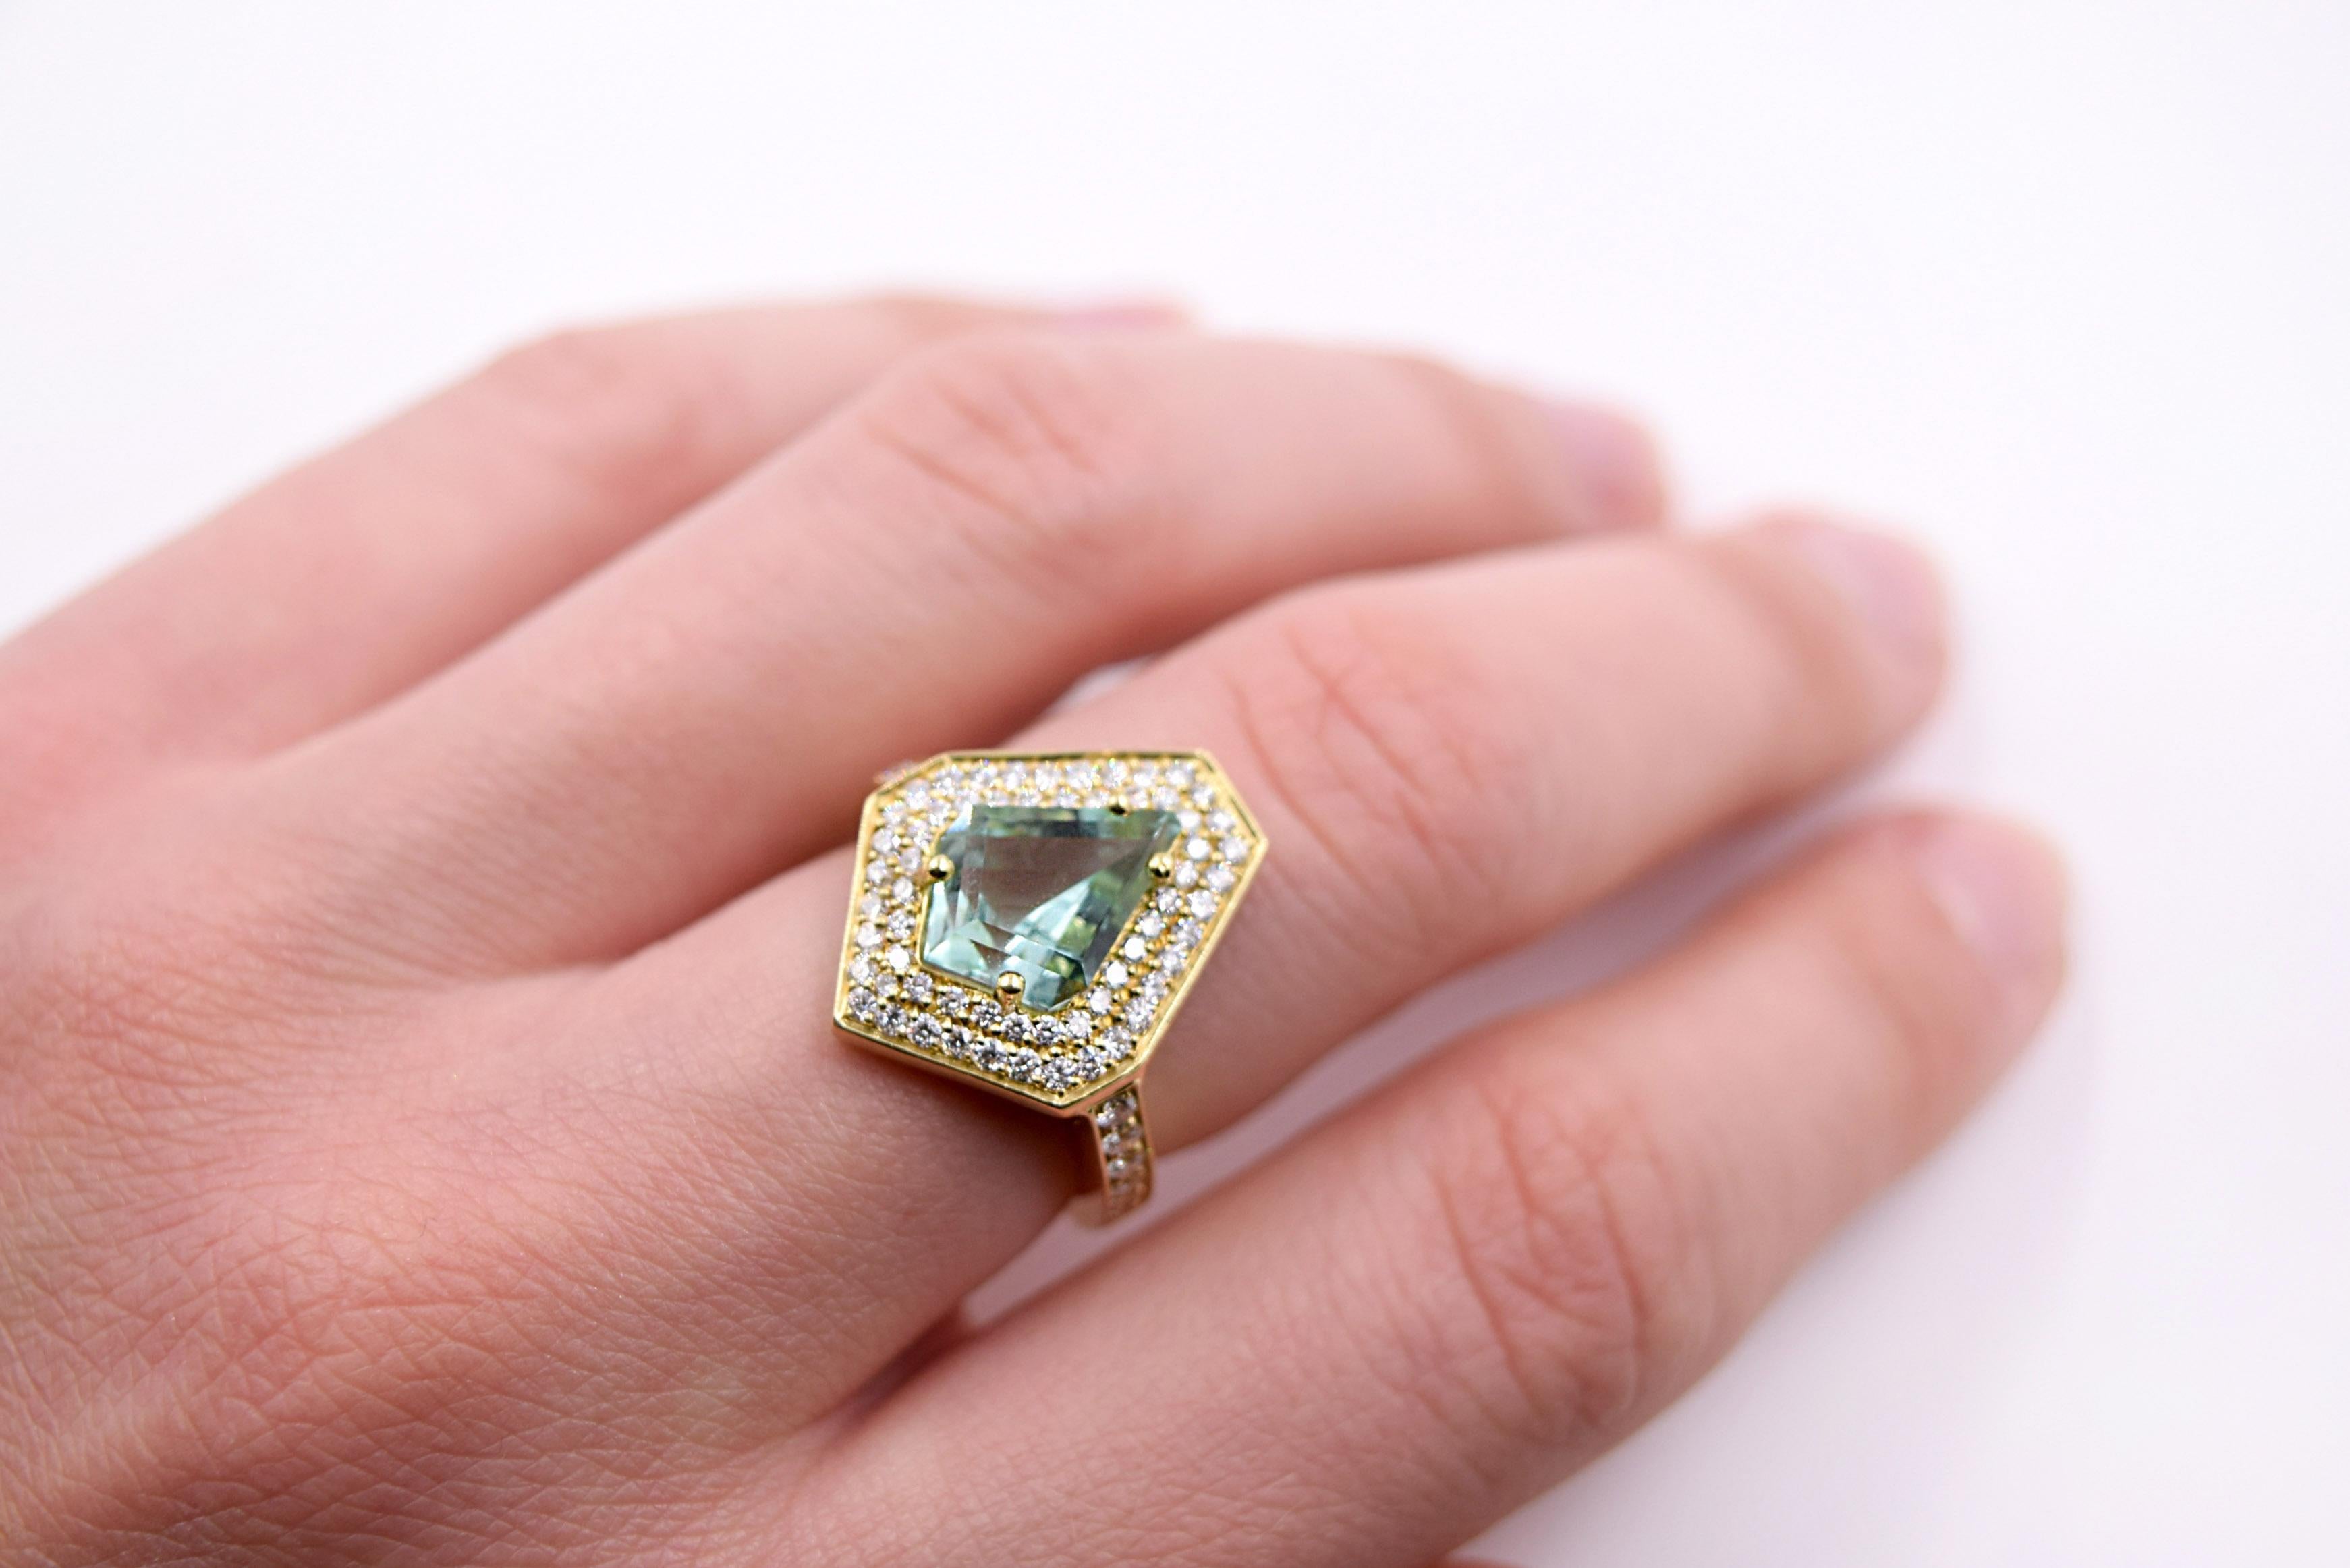 Lauren K. 2.27ct Kite Shaped Mint Tourmaline and Diamond Cocktail Ring 18K Gold For Sale 2